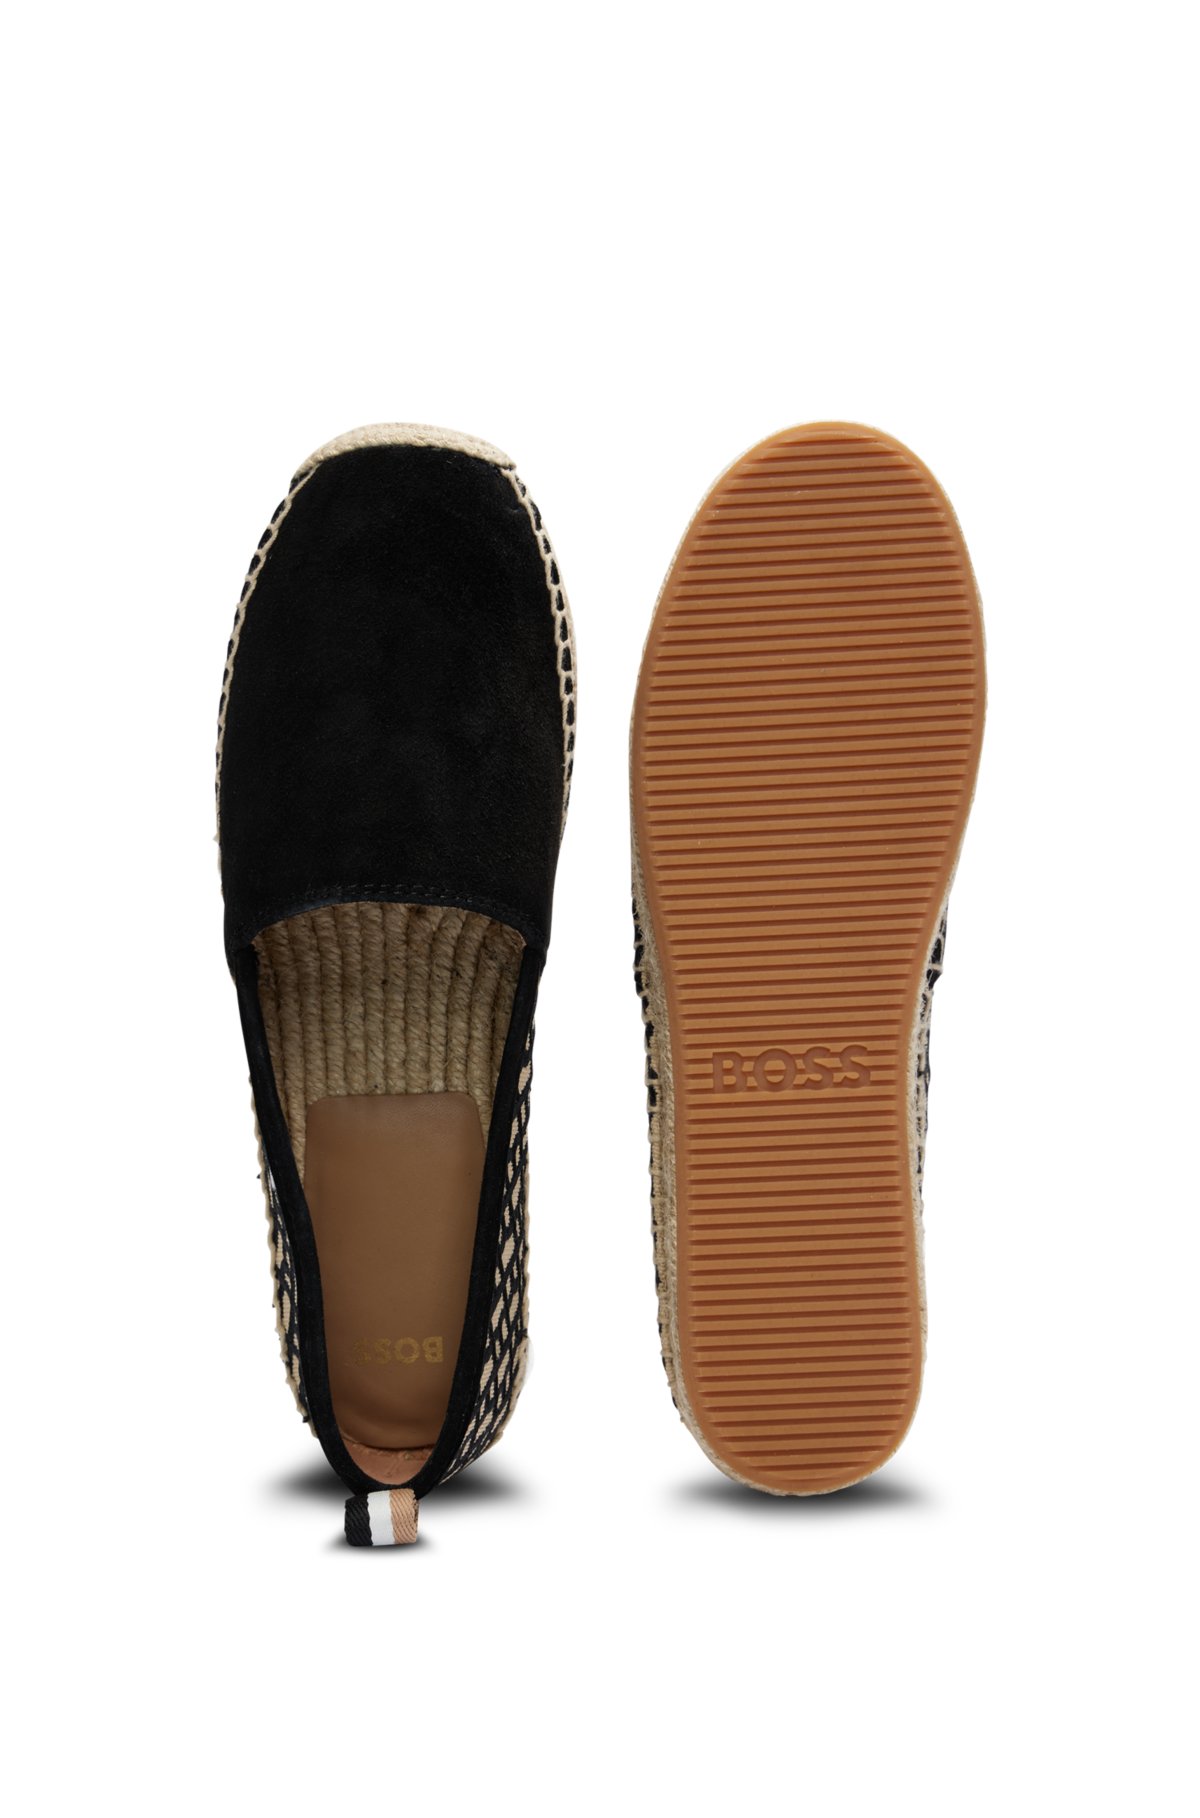 Suede slip-on espadrilles with embroidered monograms, Black